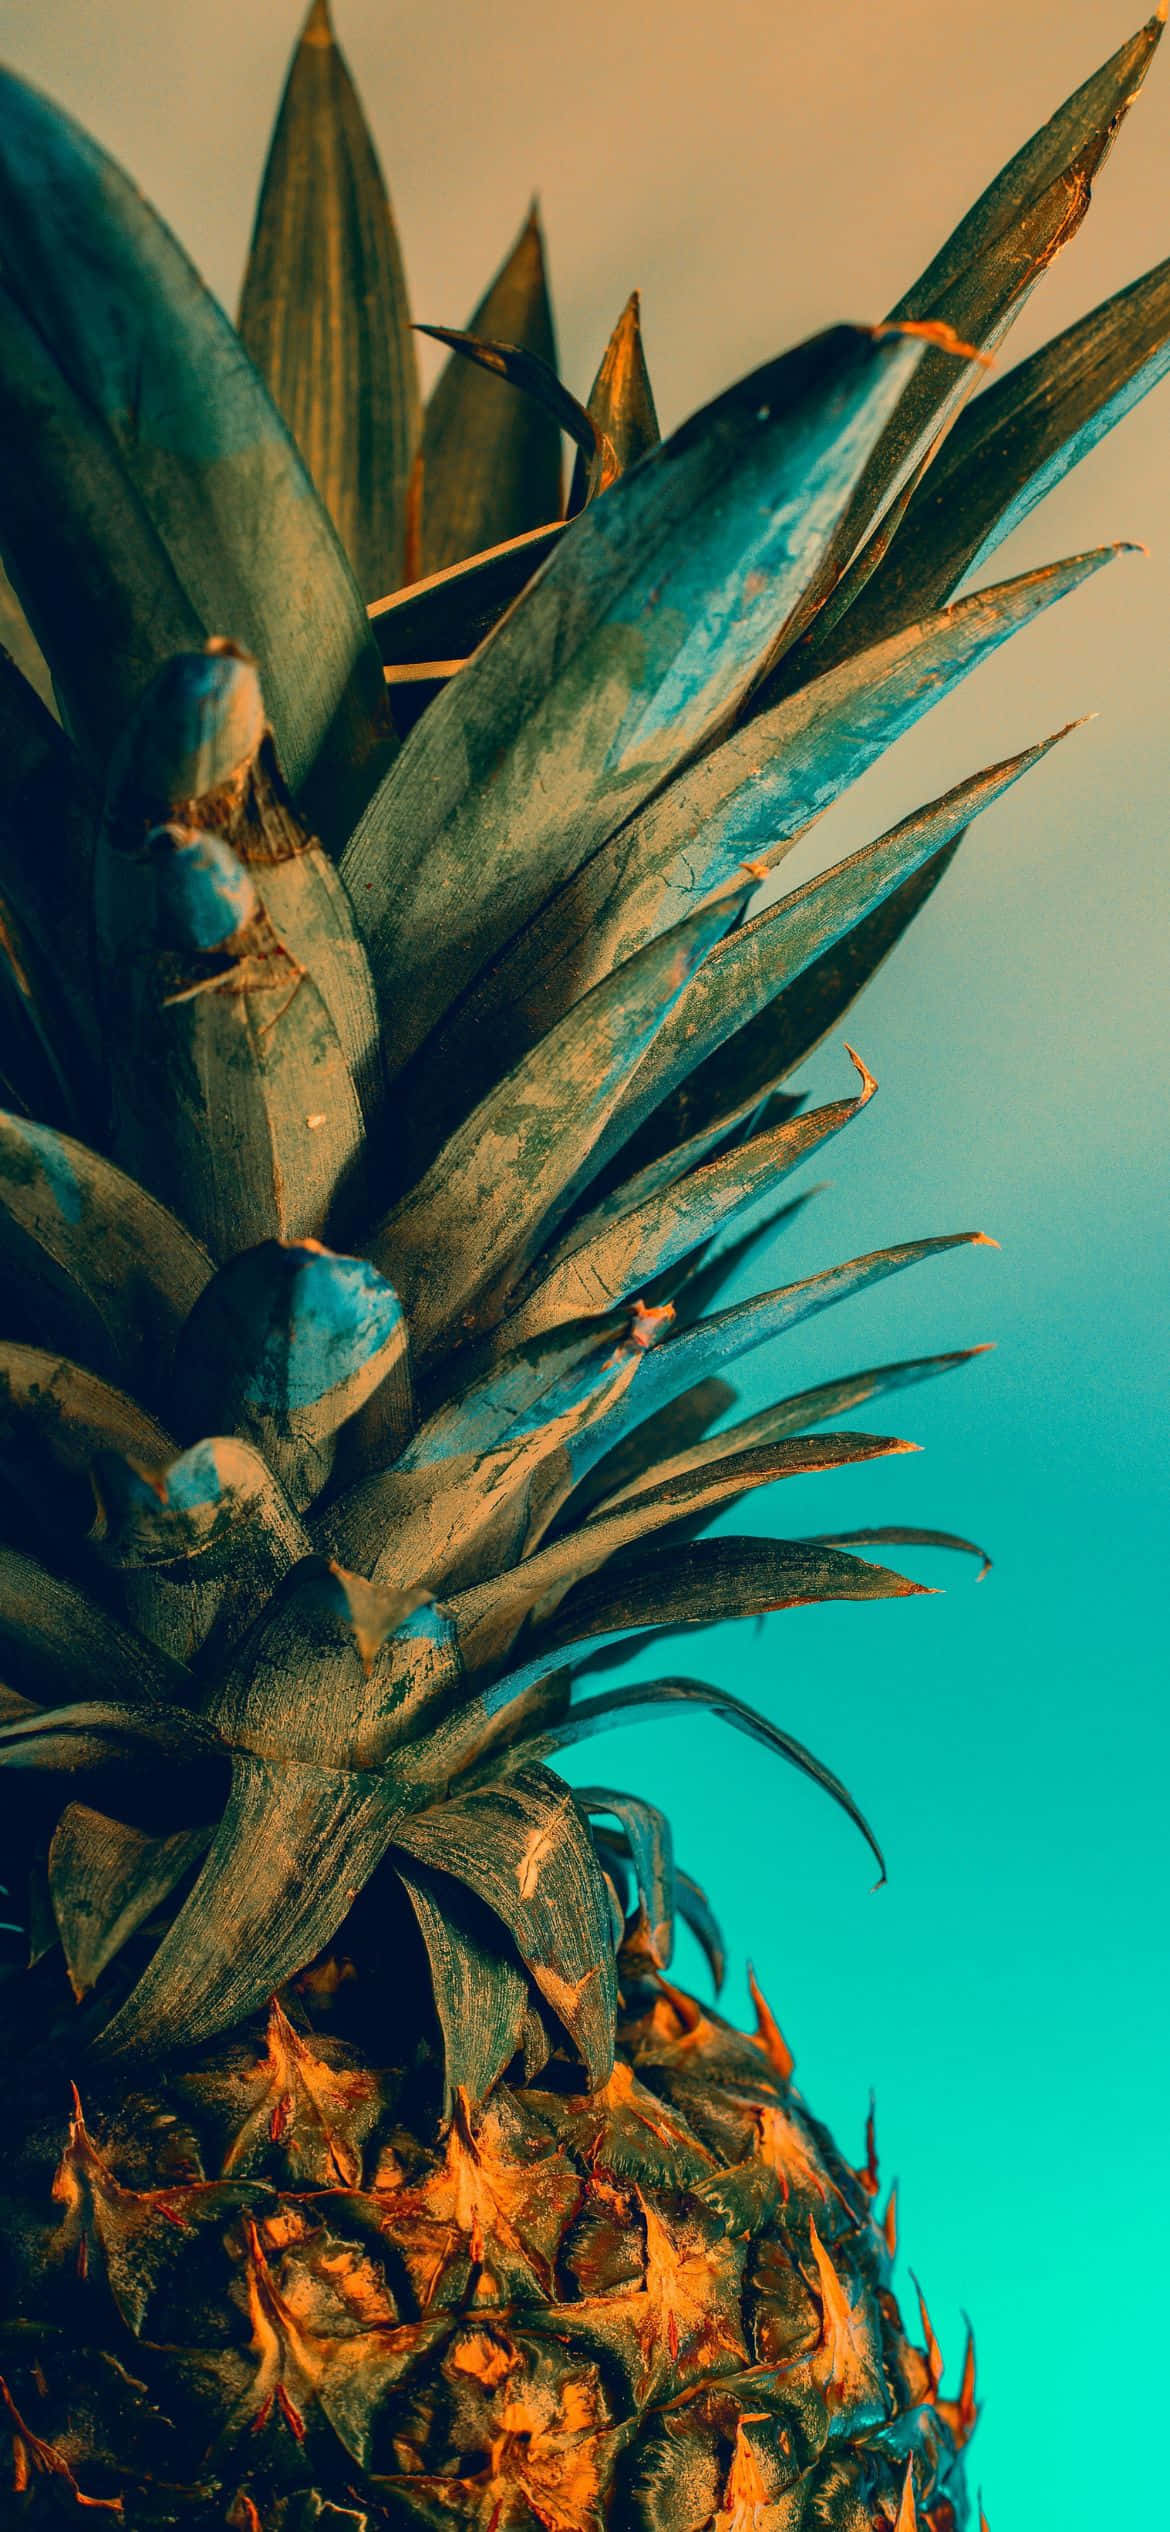 A Pineapple With A Blue Sky Background